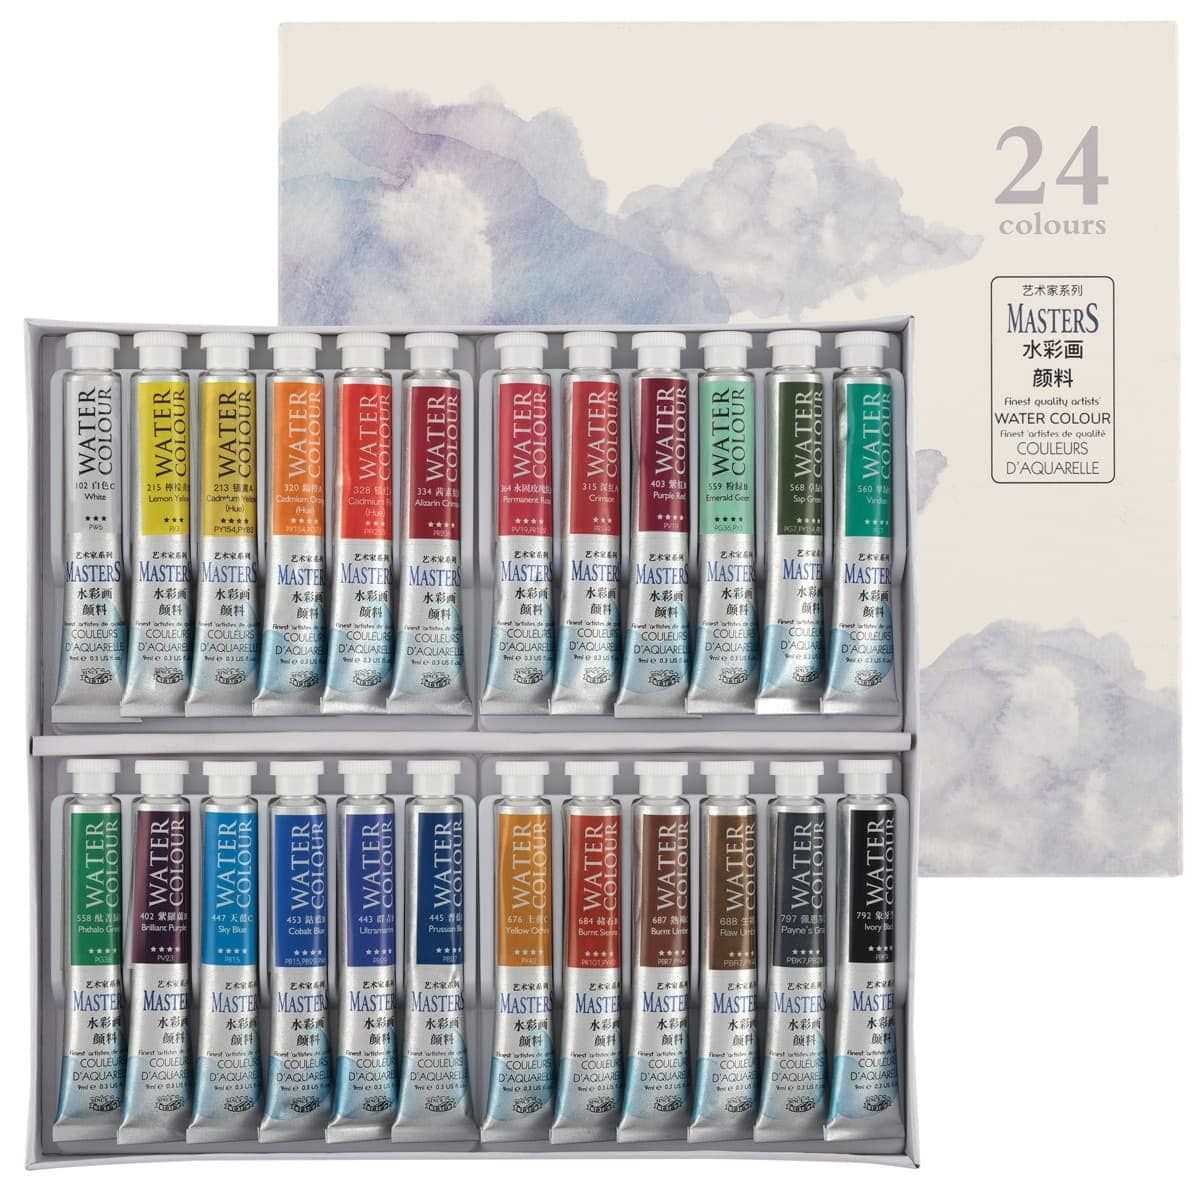 Marie's Master Quality Watercolor Set of 24